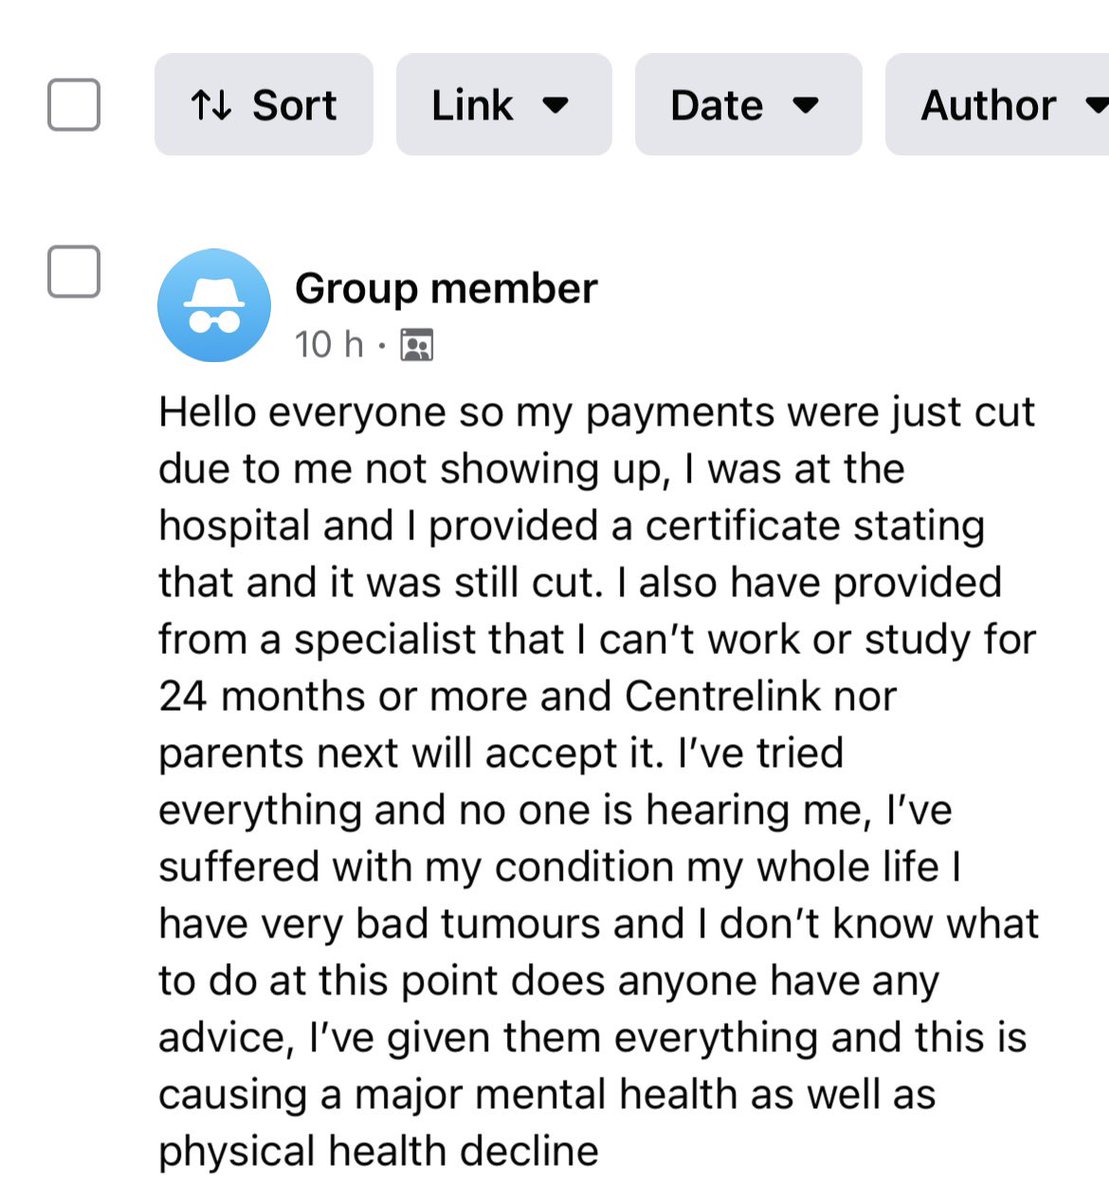 Another woman’s social security payment cut by a #ParentsNext “provider”. She has cancer. Might die, but @AustralianLabor think it’s best to cut her payments so maybe her kids will die too.